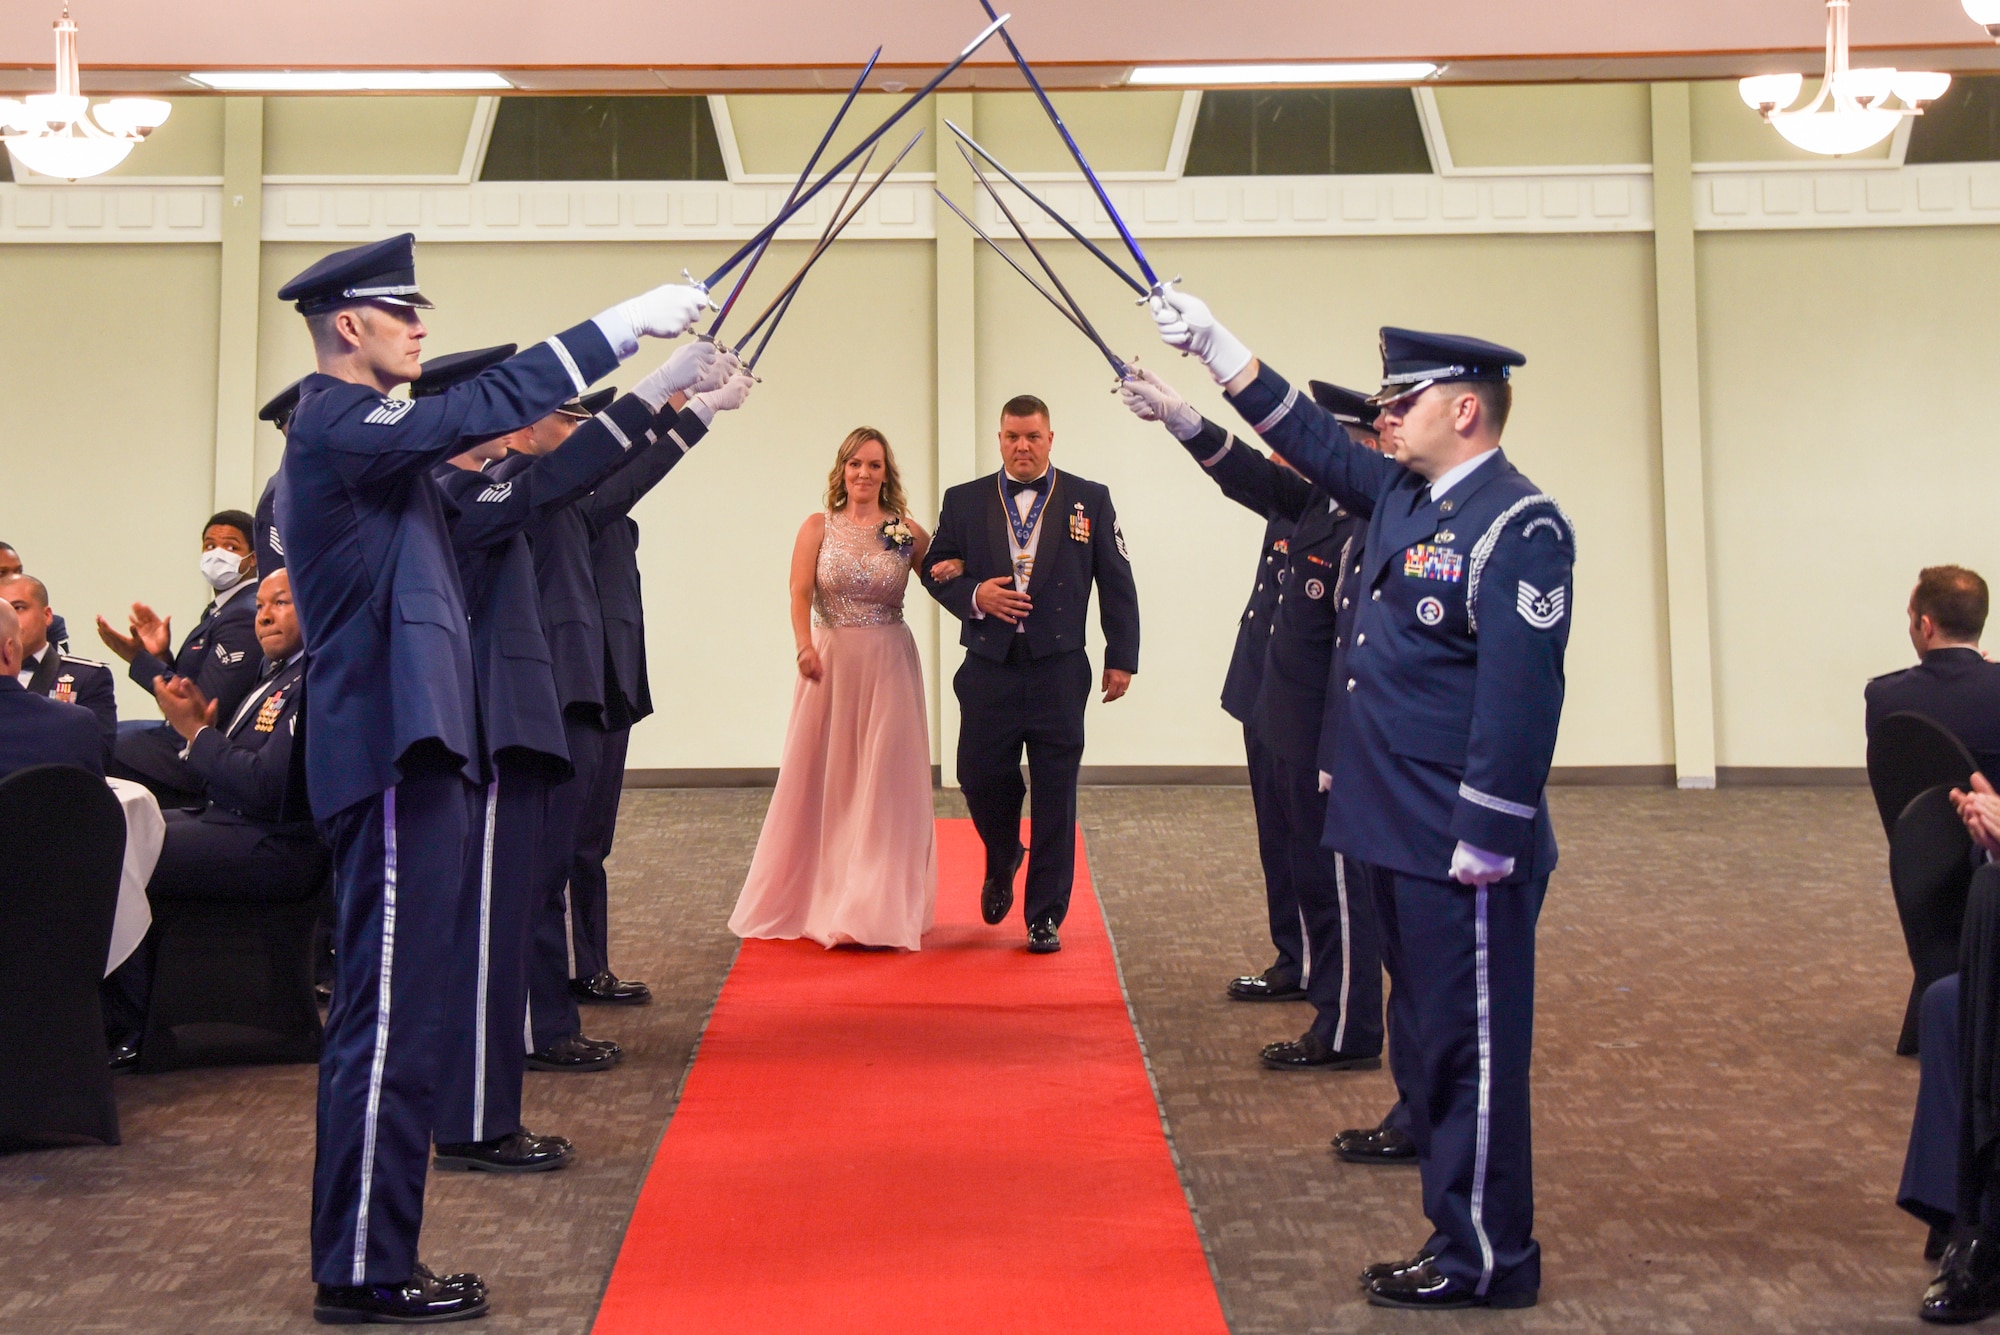 The Chief Recognition Ceremony took place at Sheppard Air Force base, Texas, June 11, 2021